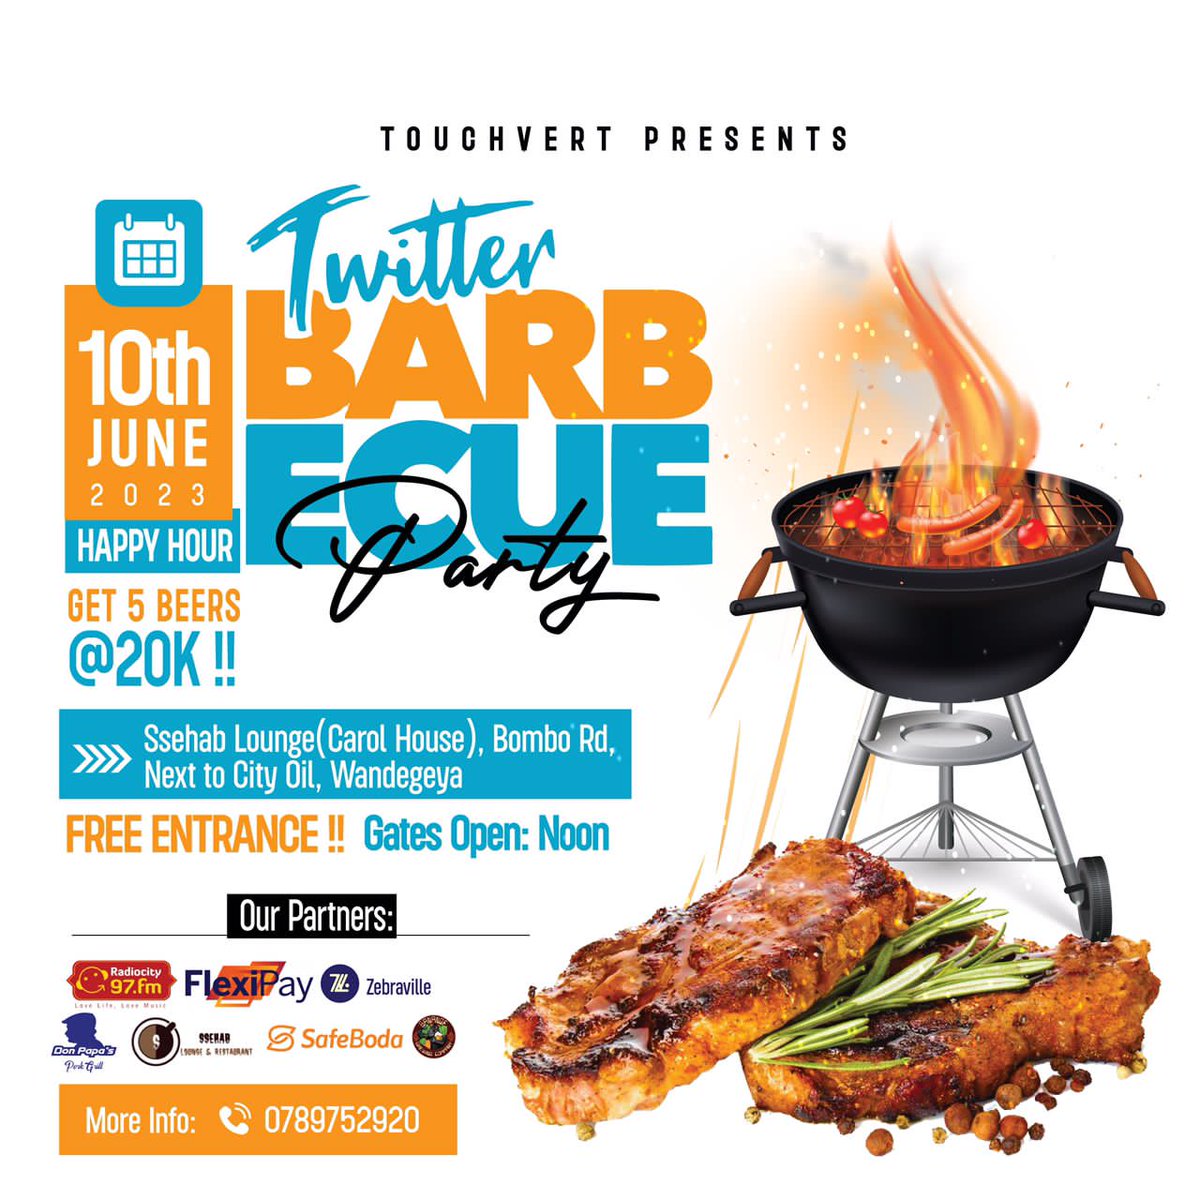 Good morning #UOT #TwitterBarbecueParty